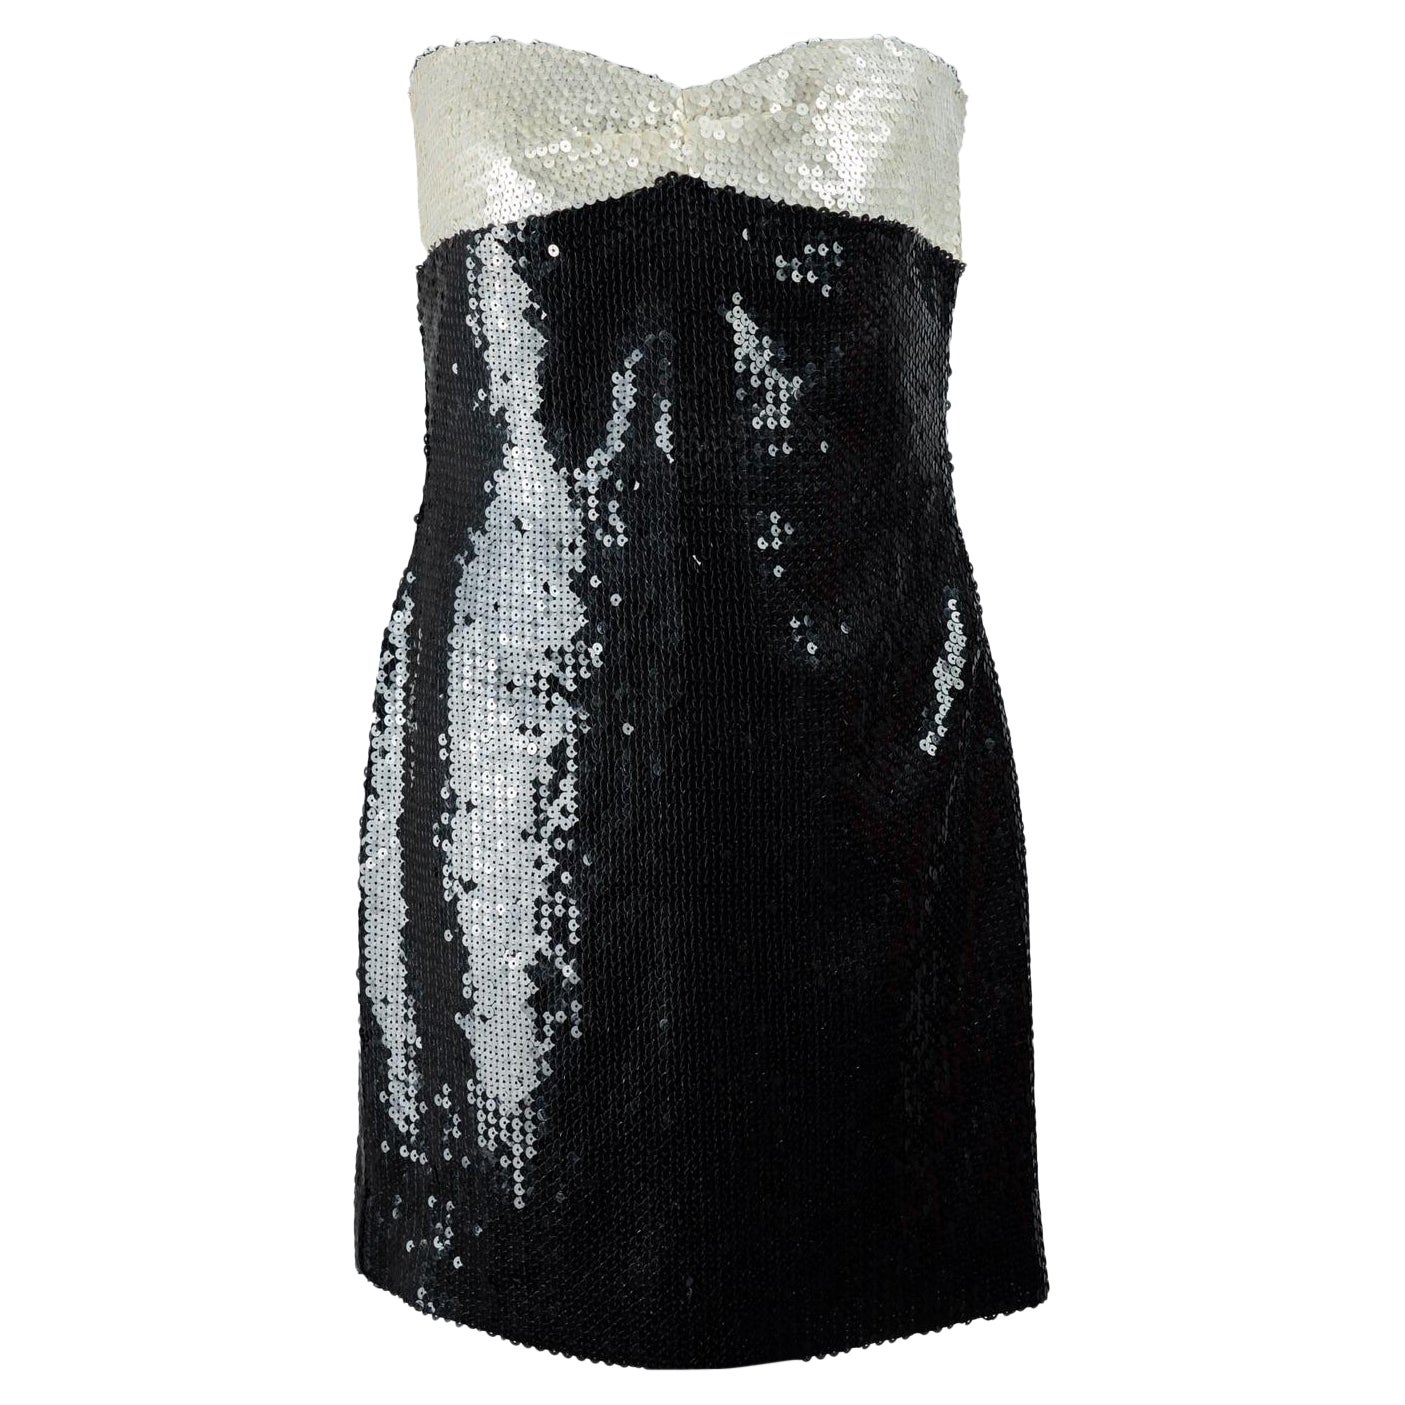 Chanel black and white sequin strapless dress. Spring Summer 1987 